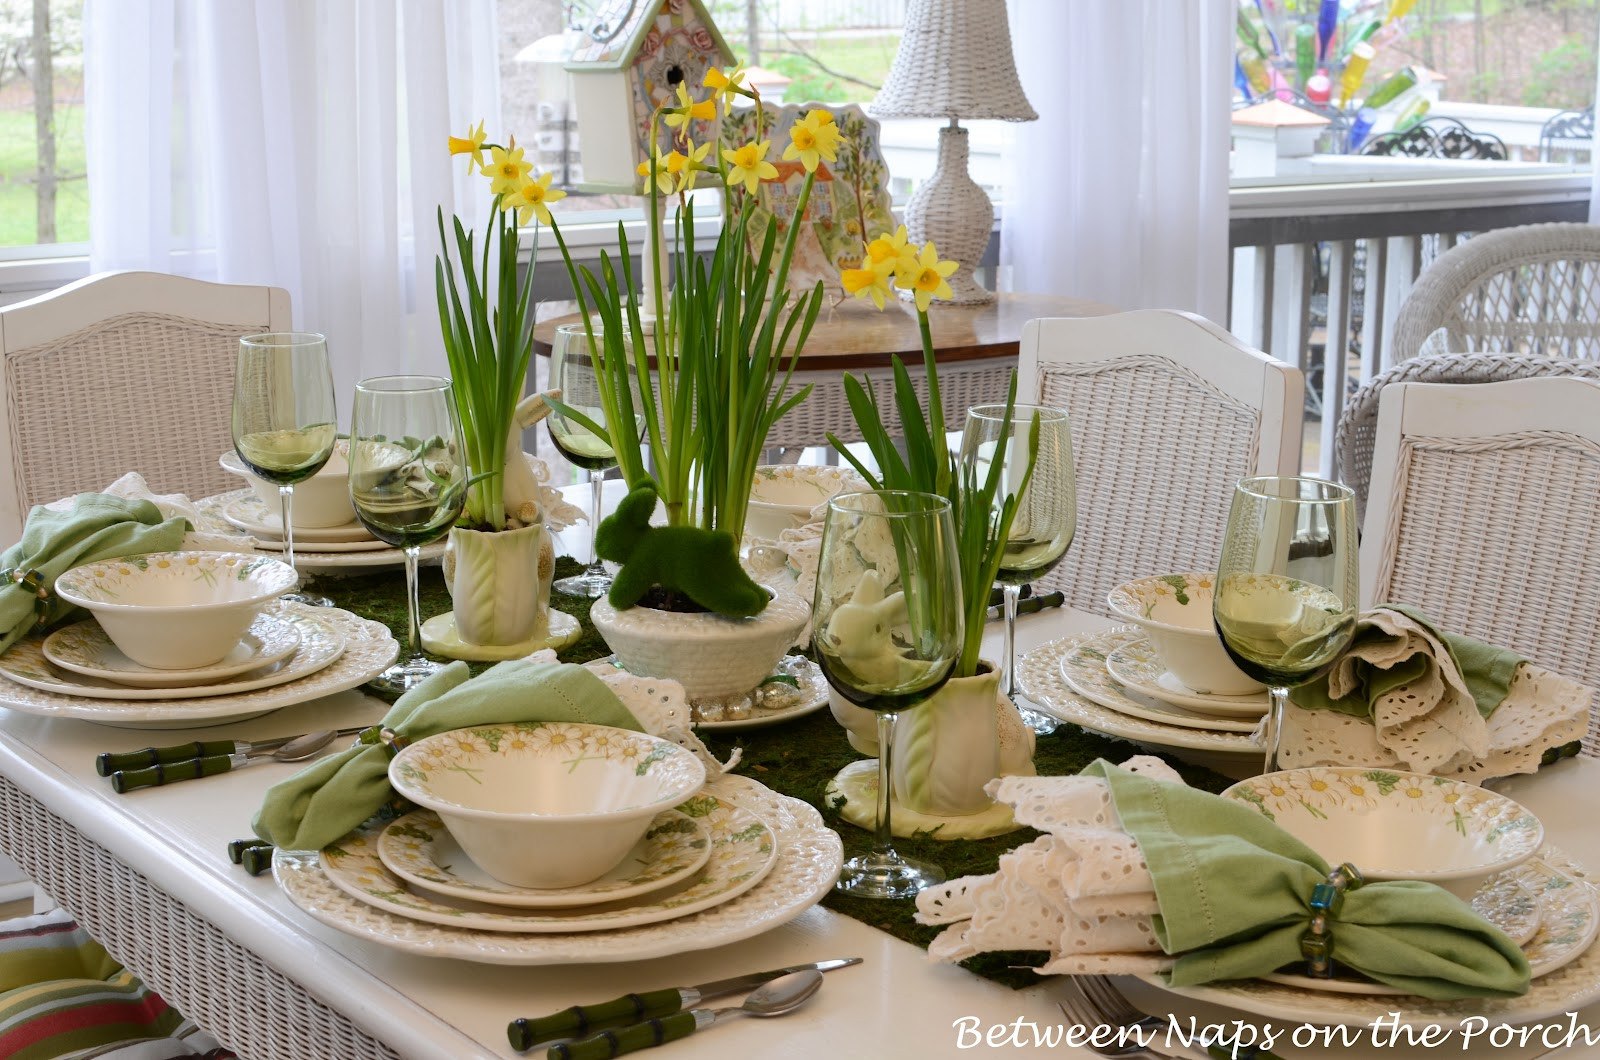 Easter Dinner Table Decorations
 Lovely Table Decorating Ideas for The Up ing Easter